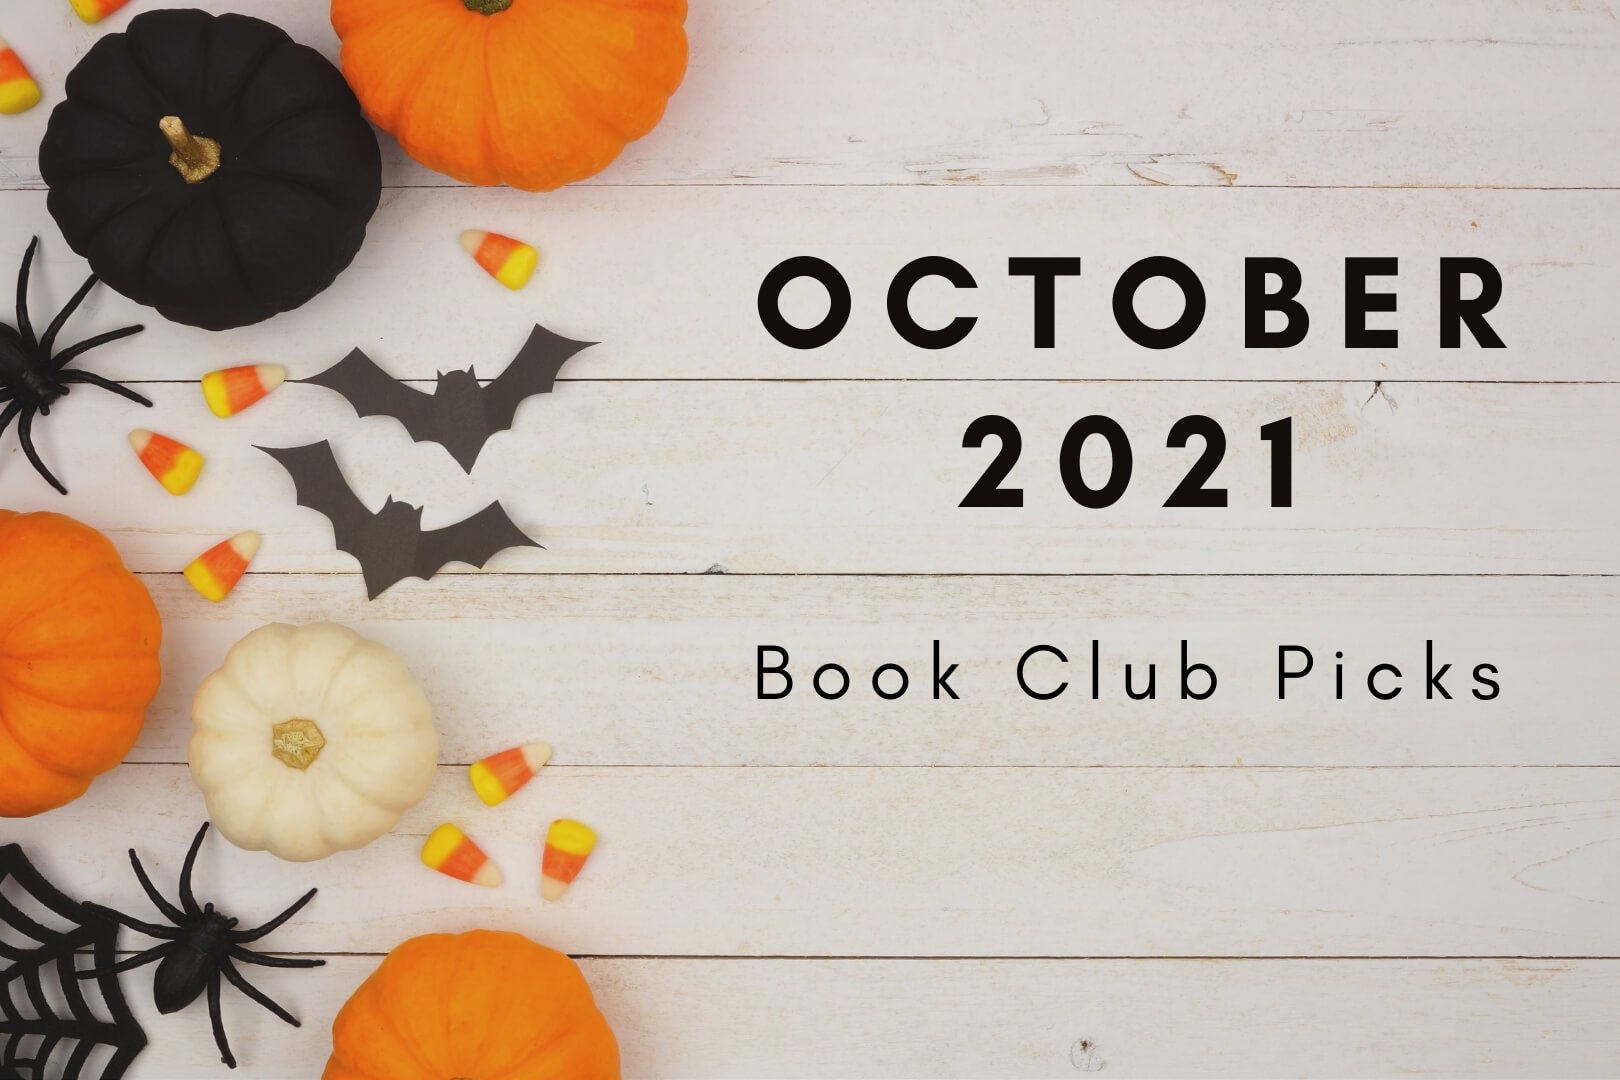 Book Club Picks for October 2021